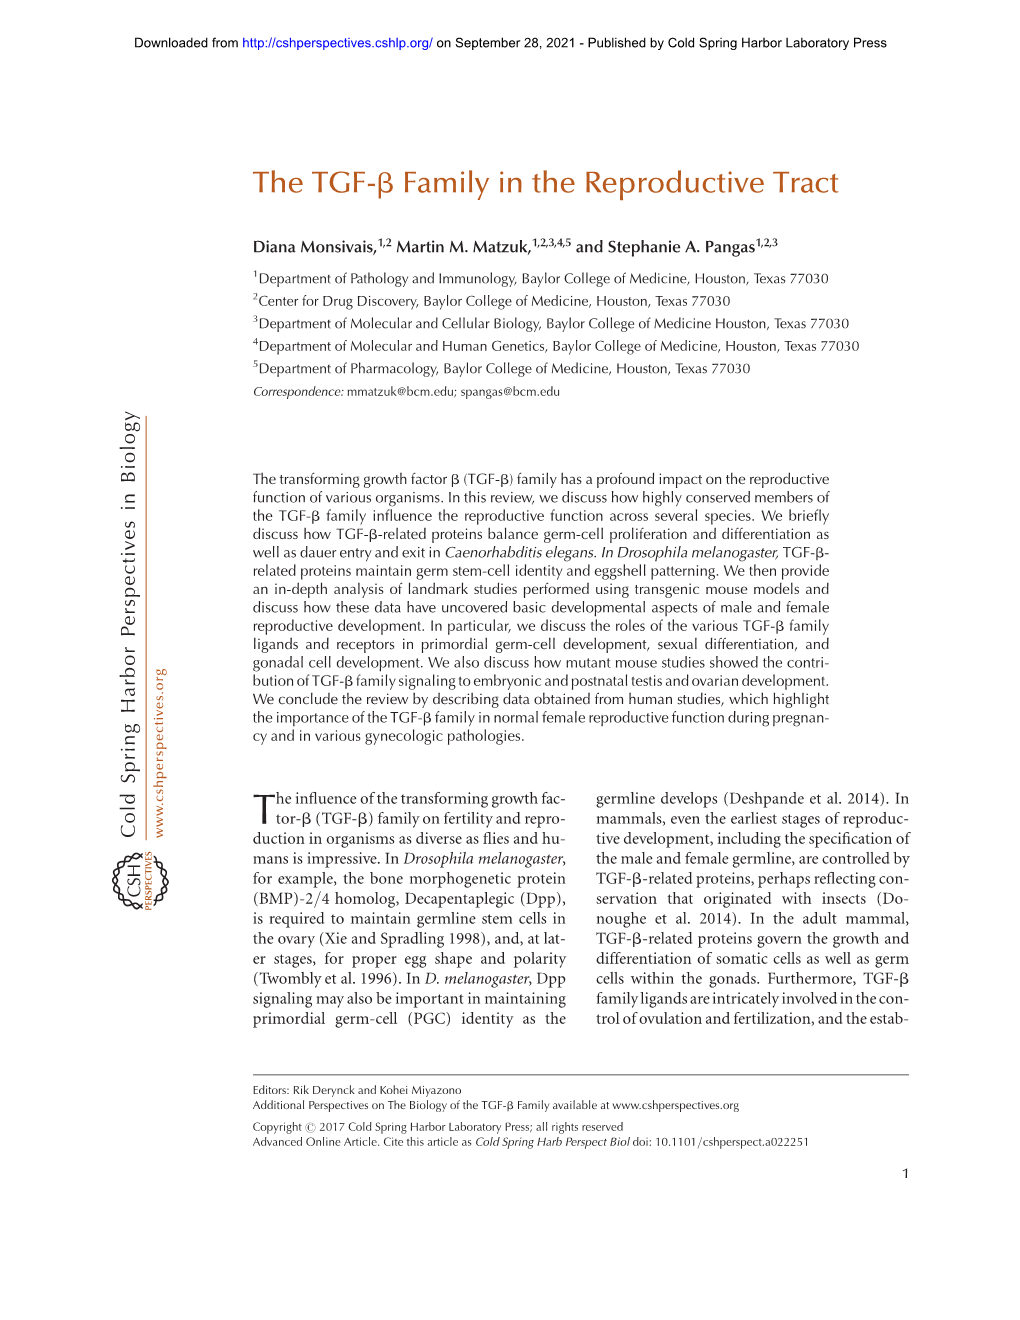 The TGF-B Family in the Reproductive Tract